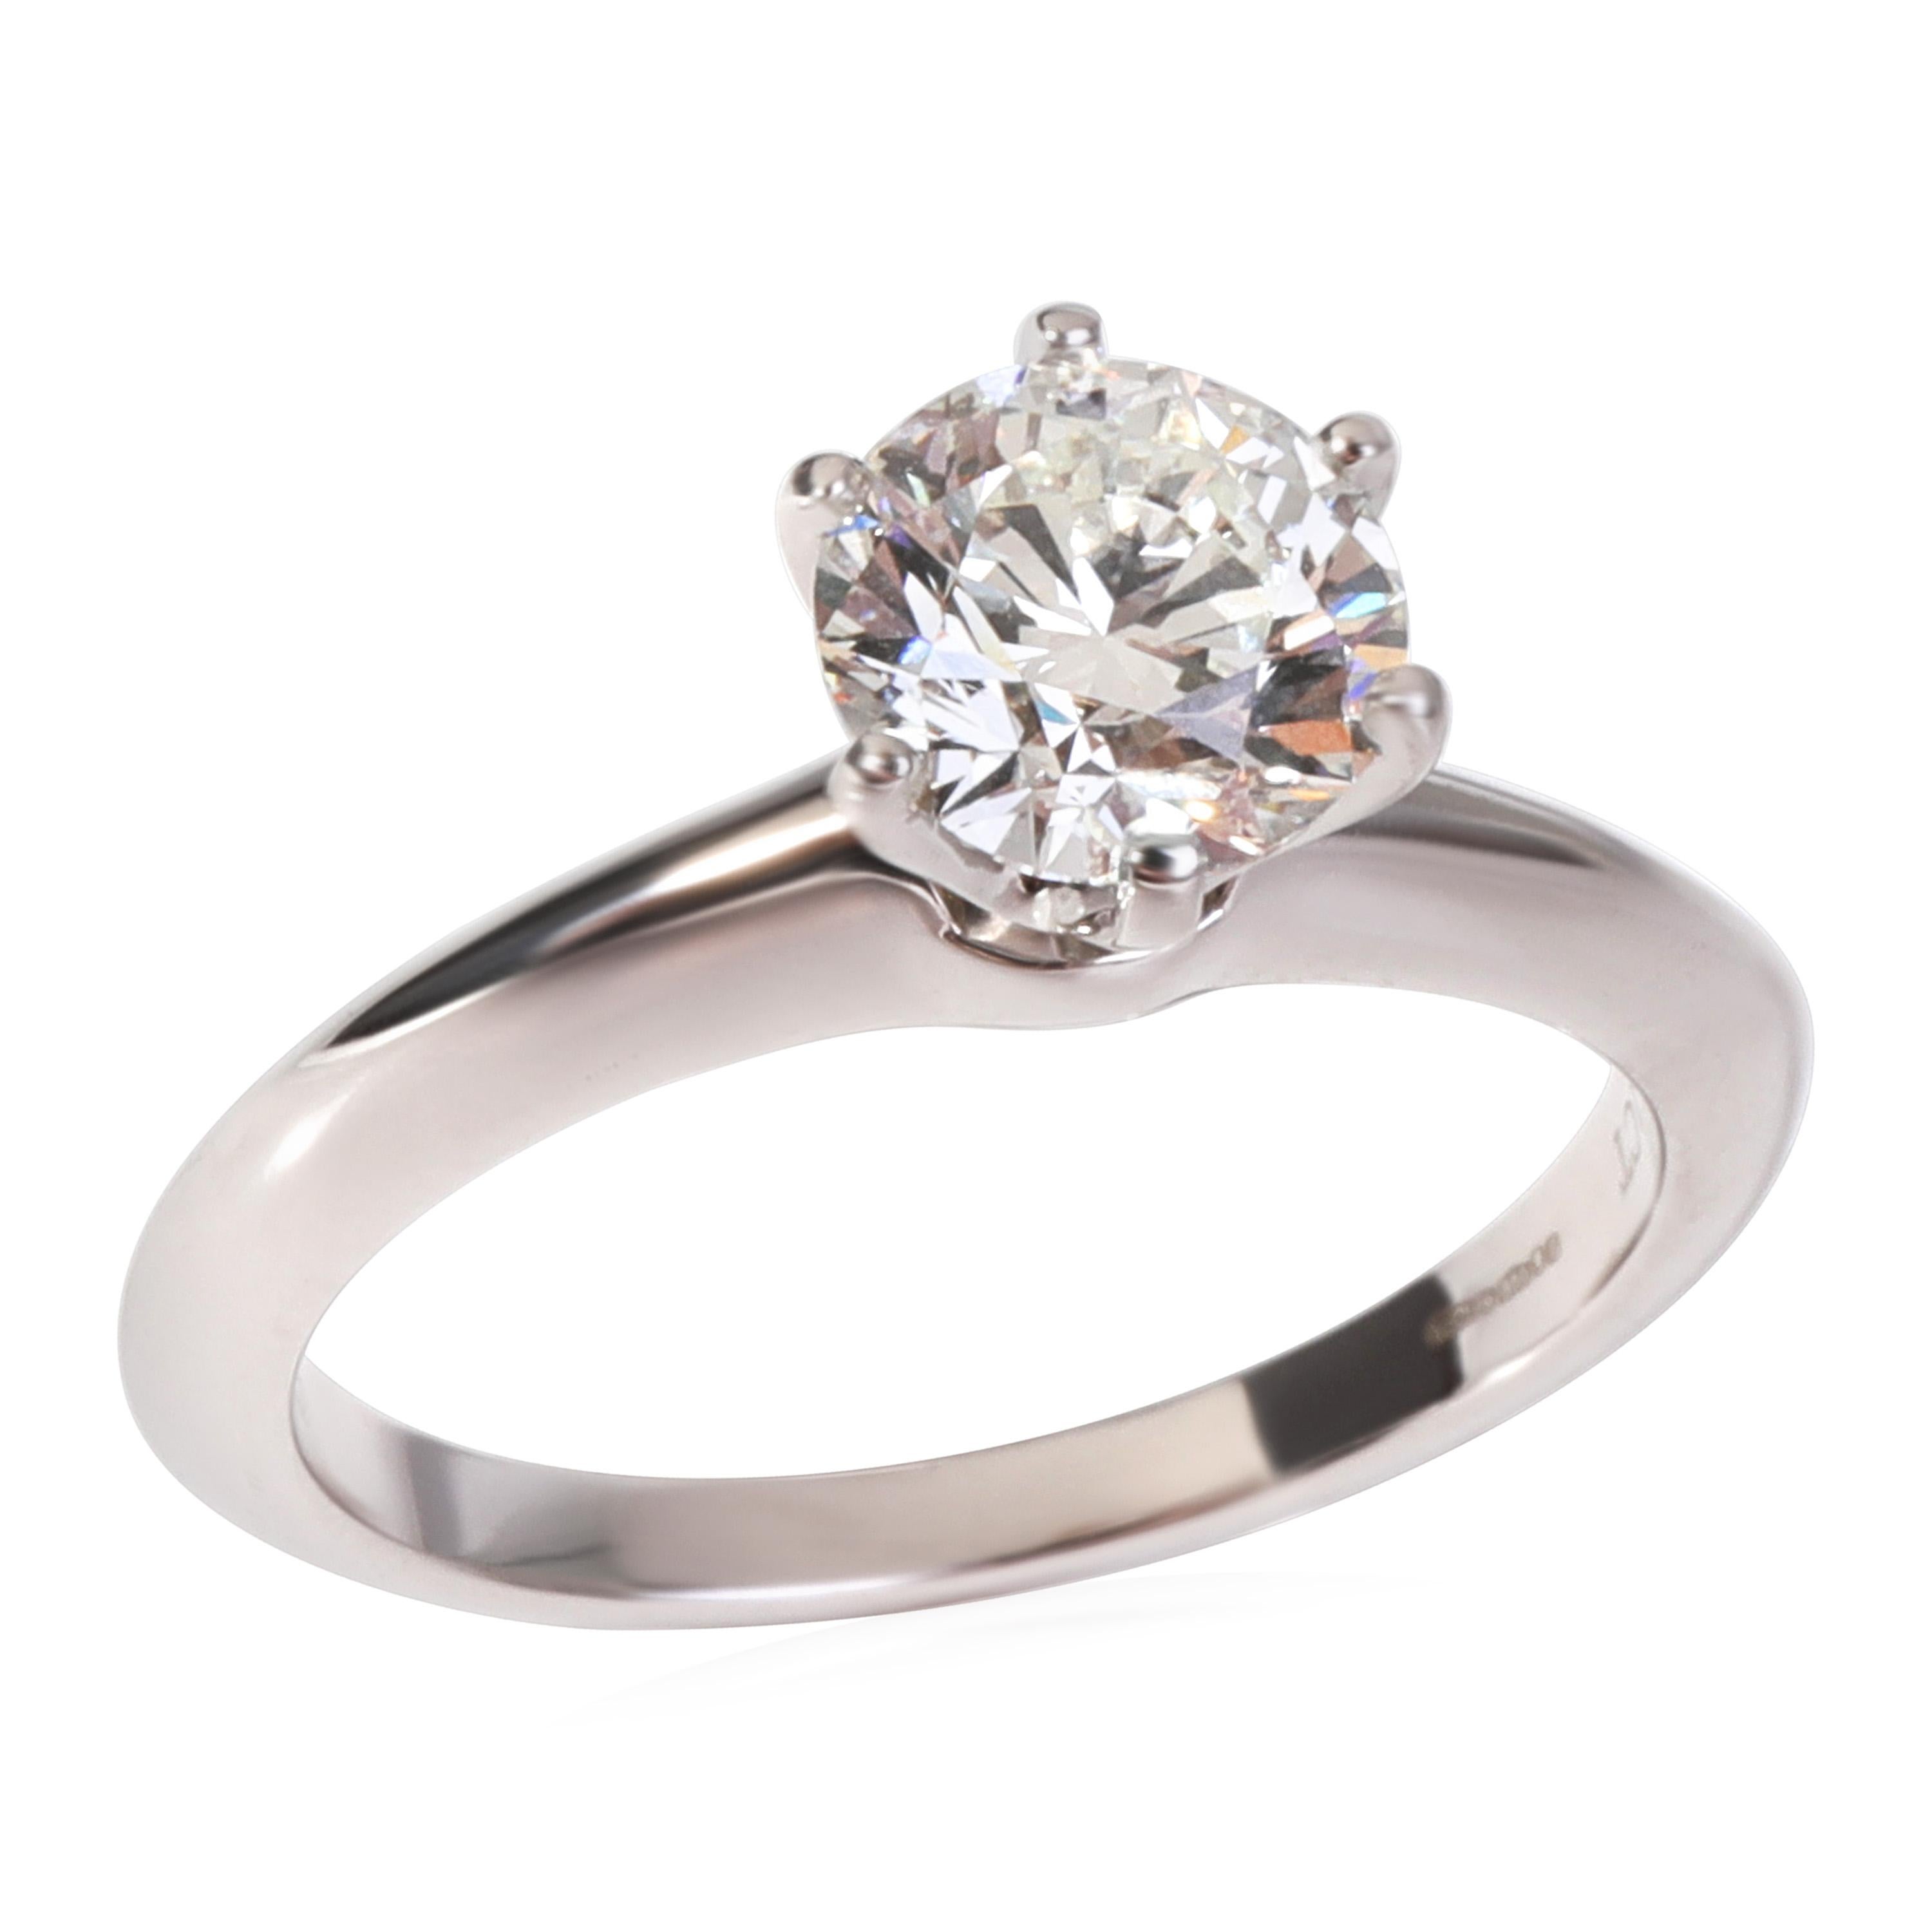 Tiffany & Co. Diamond Engagement Ring in Platinum (1.11 ct H/VS1)

PRIMARY DETAILS
SKU: 120078
Listing Title: Tiffany & Co. Diamond Engagement Ring in Platinum (1.11 ct H/VS1)
Condition Description: Retails for 16000 USD. In excellent condition and